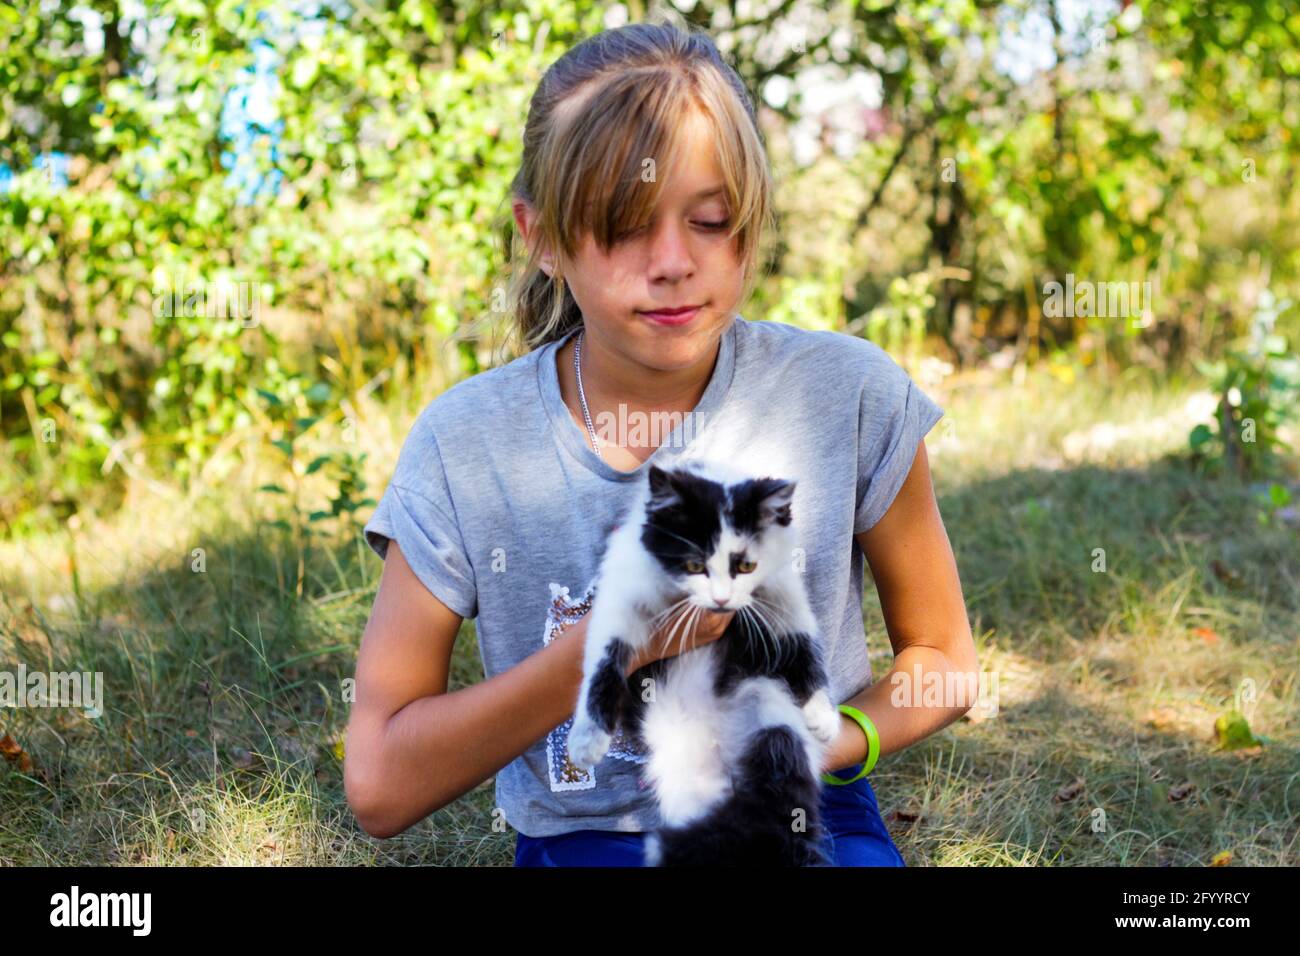 Defocus blonde little smiling girl playing with cat, black and white small kitten. Nature blurred green summer background. Girl holding and stroking p Stock Photo